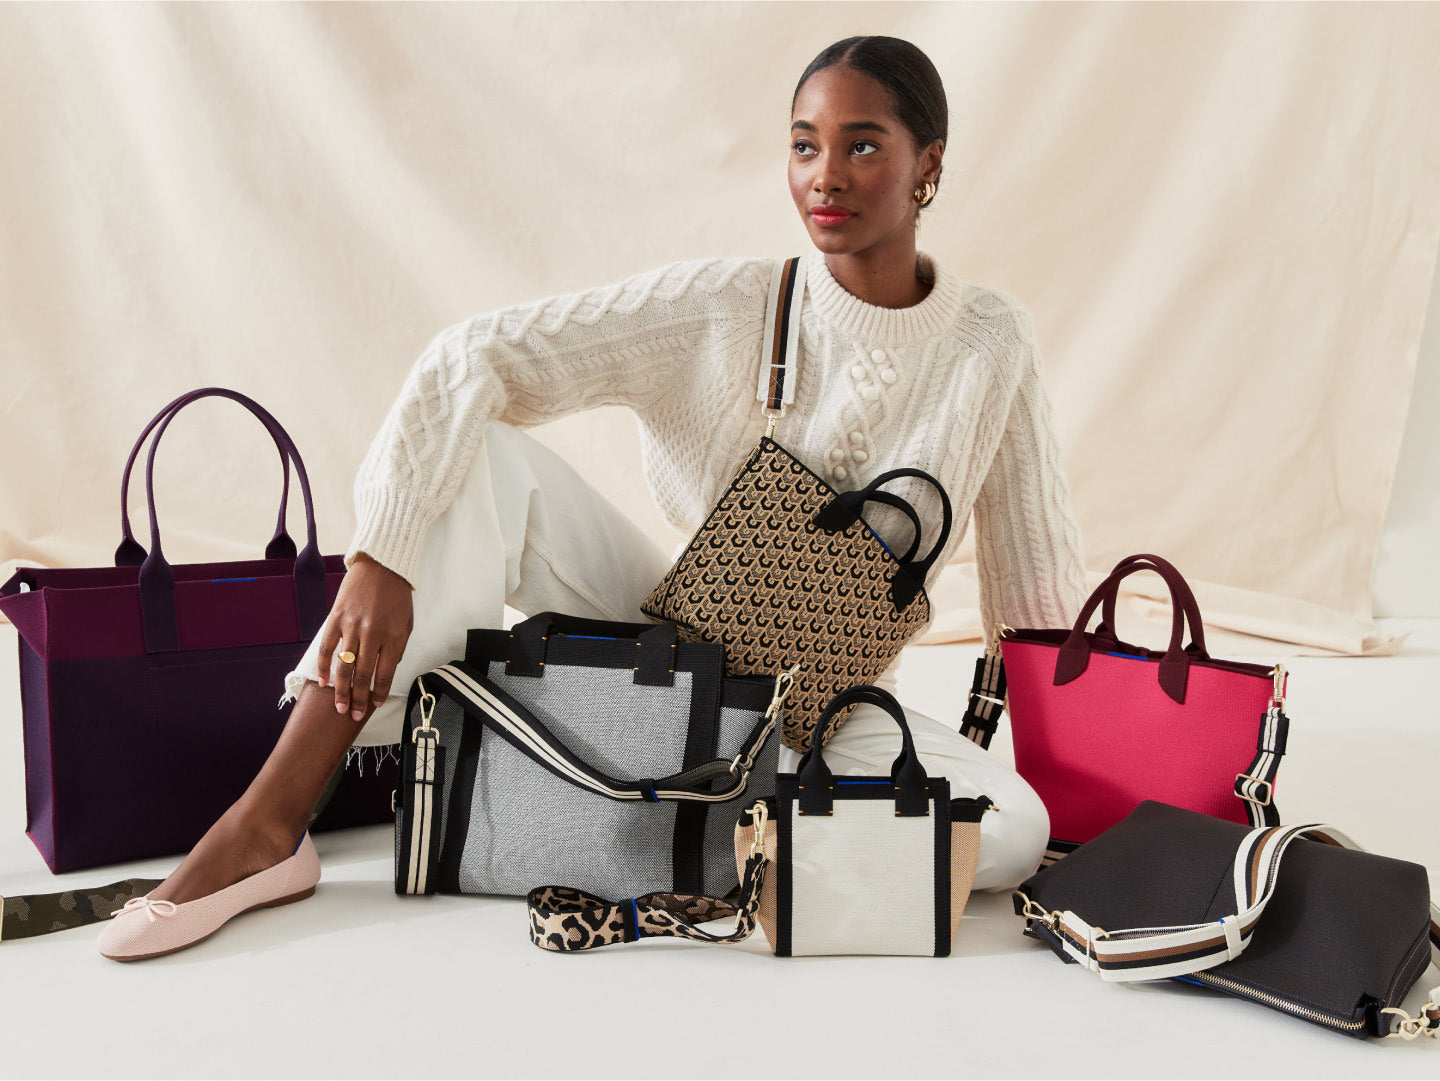 s New Brand The Fix Has Cute Cheap Handbags and Shoes